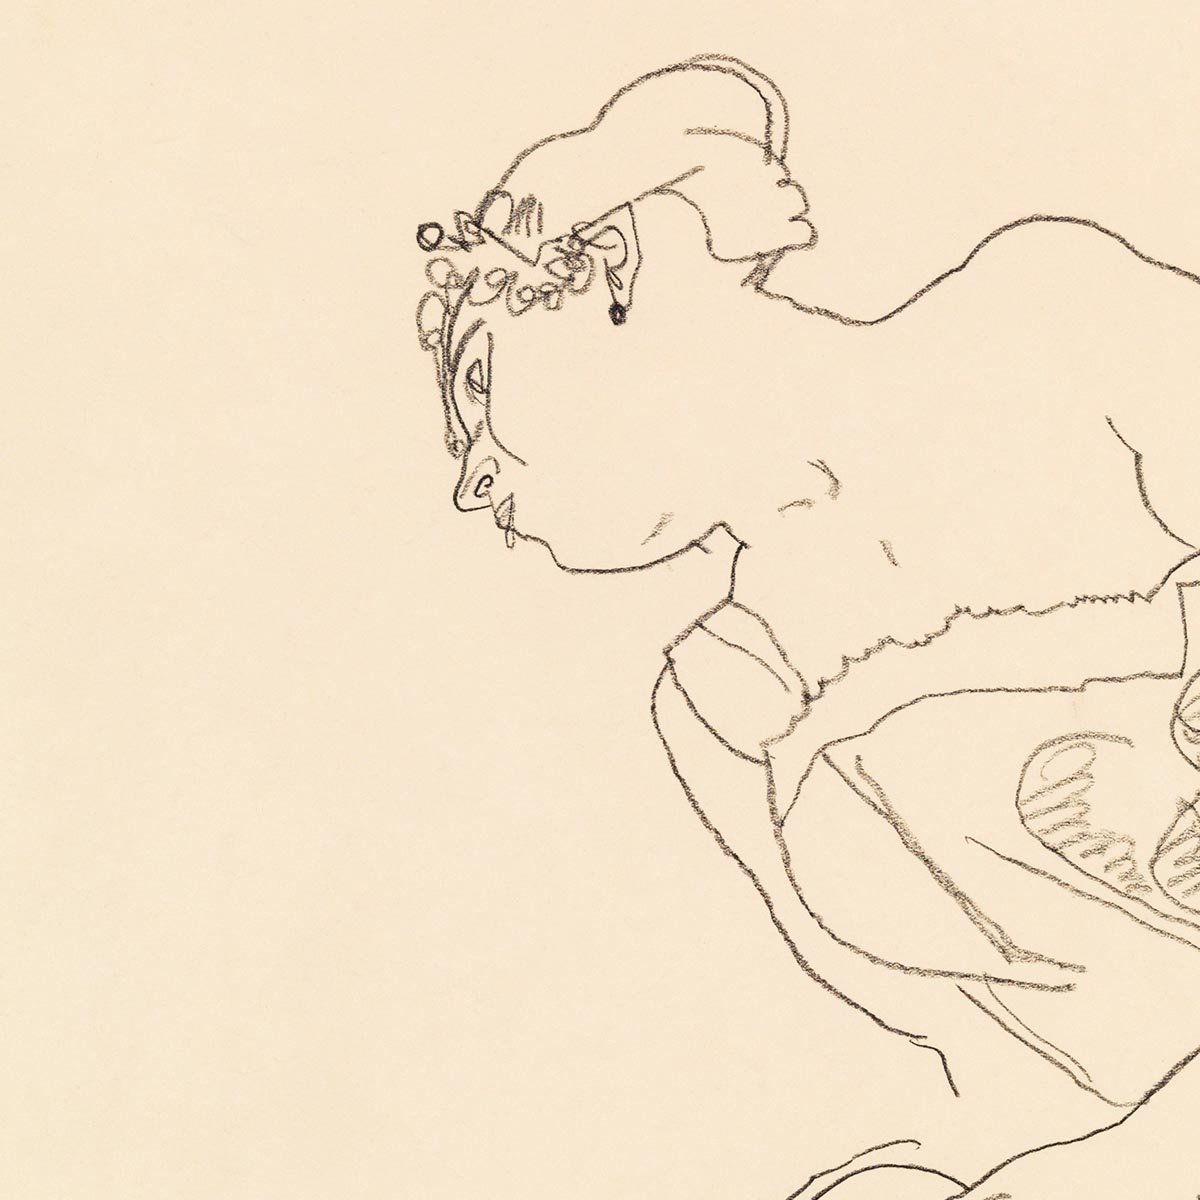 Seated Woman in Corset and Boots by Egon Schiele